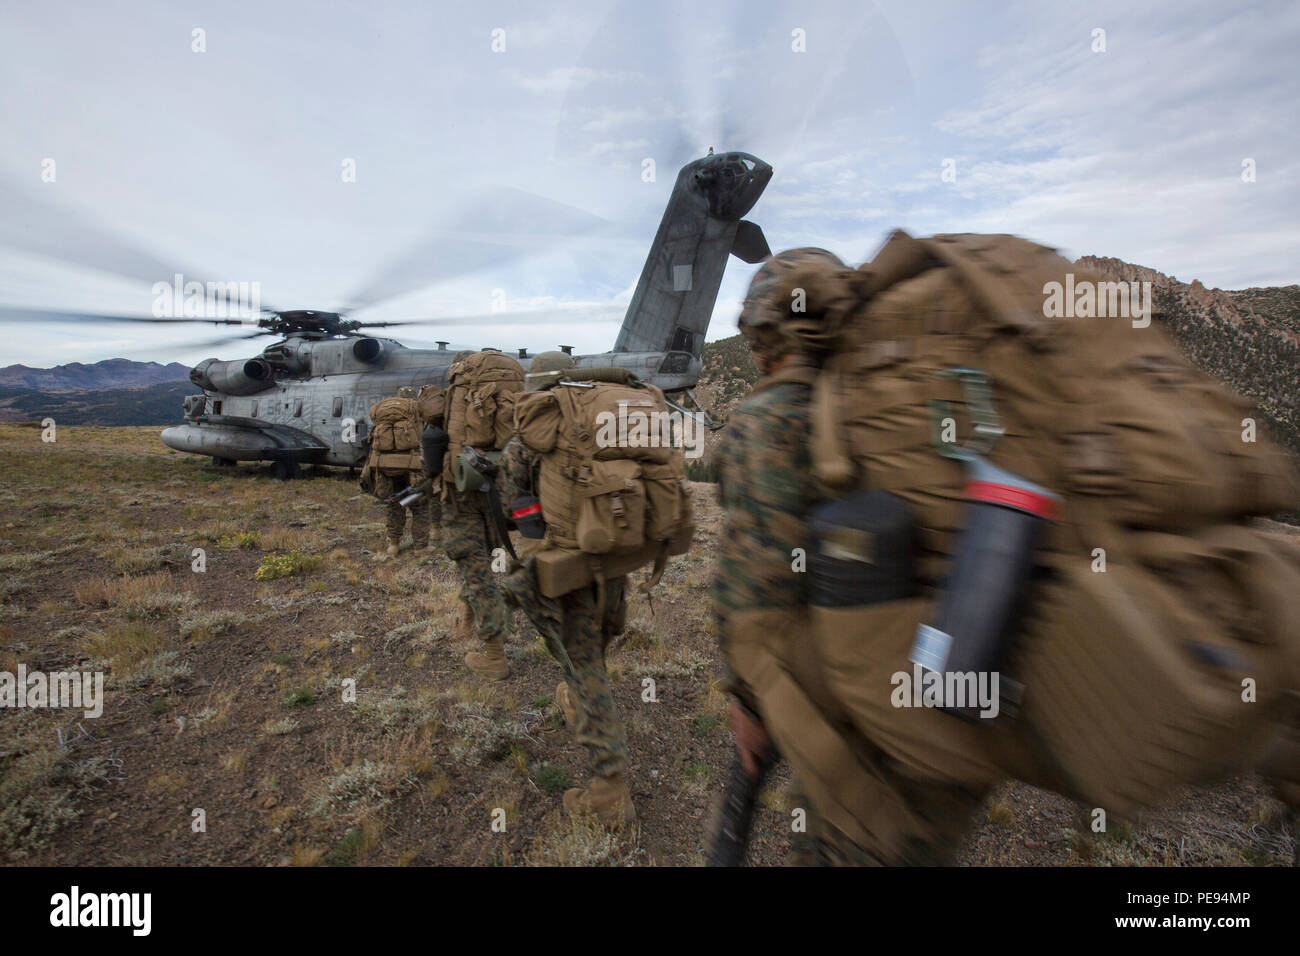 U.S. Marines with Bravo Company, 1st Battalion, 6th Marine Regiment, 2nd Marine Division (MARDIV), load into a CH-53E Super Stallion, flown by Marines with Marine Heavy Helicopter Squadron 465, 3rd Marine Aircraft Wing, in order to return to lower base camp for the conclusion of Mountain Exercise 5-15, Marine Corps Mountain Warfare Training Center, Bridgeport, Calif., Sept. 24, 2015. Marines participate in a month-long field exercise focusing on core mission essential tasks such as assault climbing, animal packing and small unit movements, to strengthen expeditionary high altitude warfare tact Stock Photo